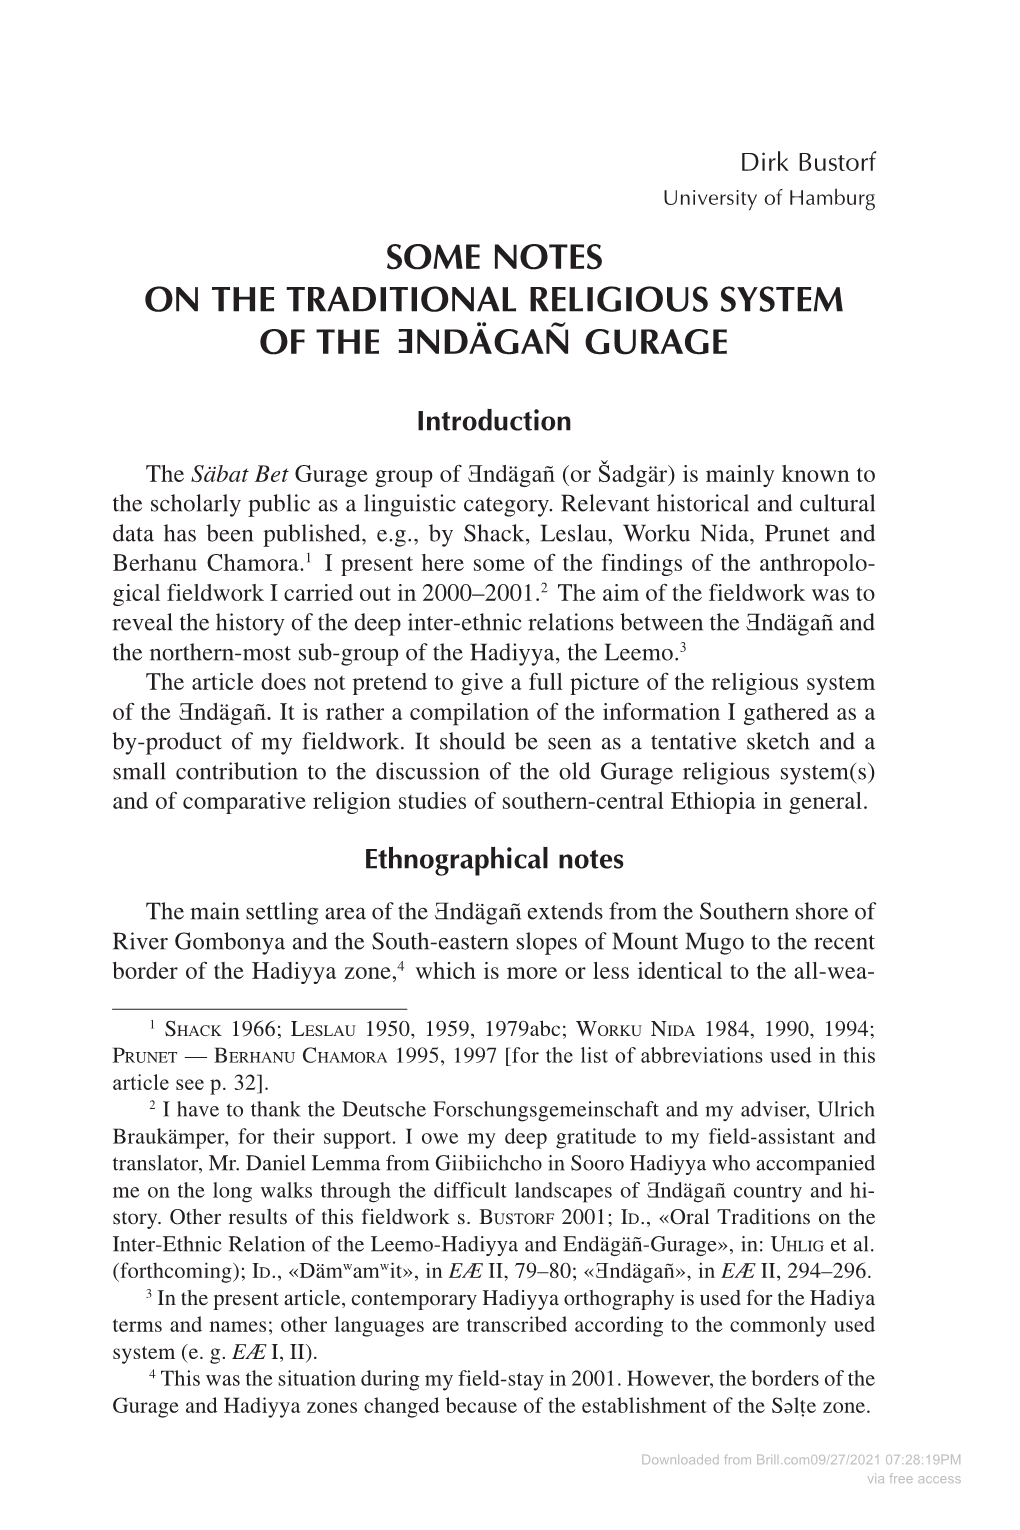 Some Notes on the Traditional Religious System Of